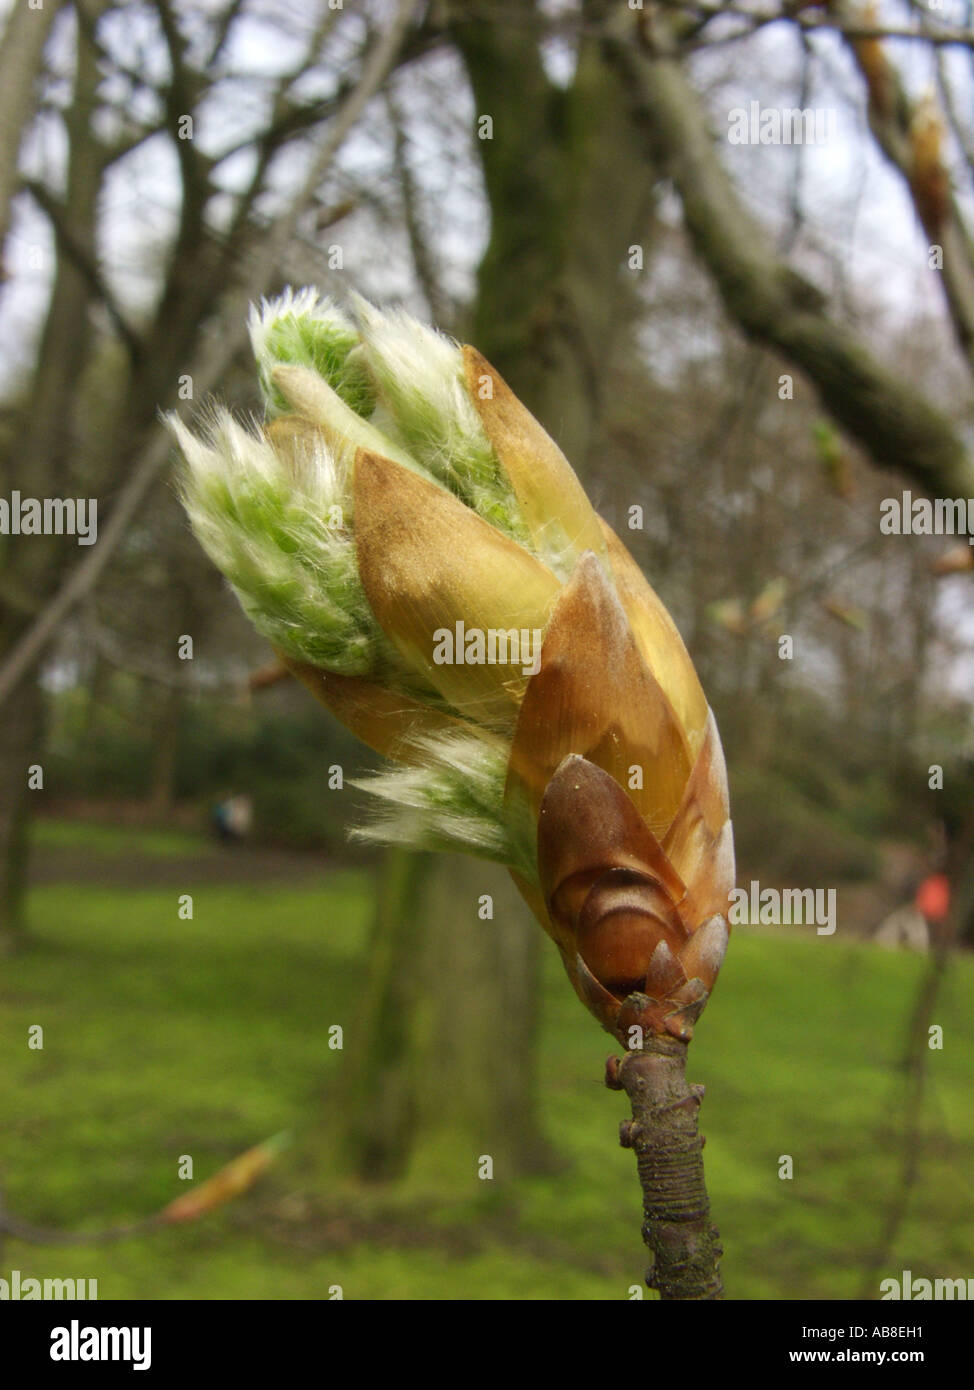 common beech (Fagus sylvatica), shoot with male flowers Stock Photo